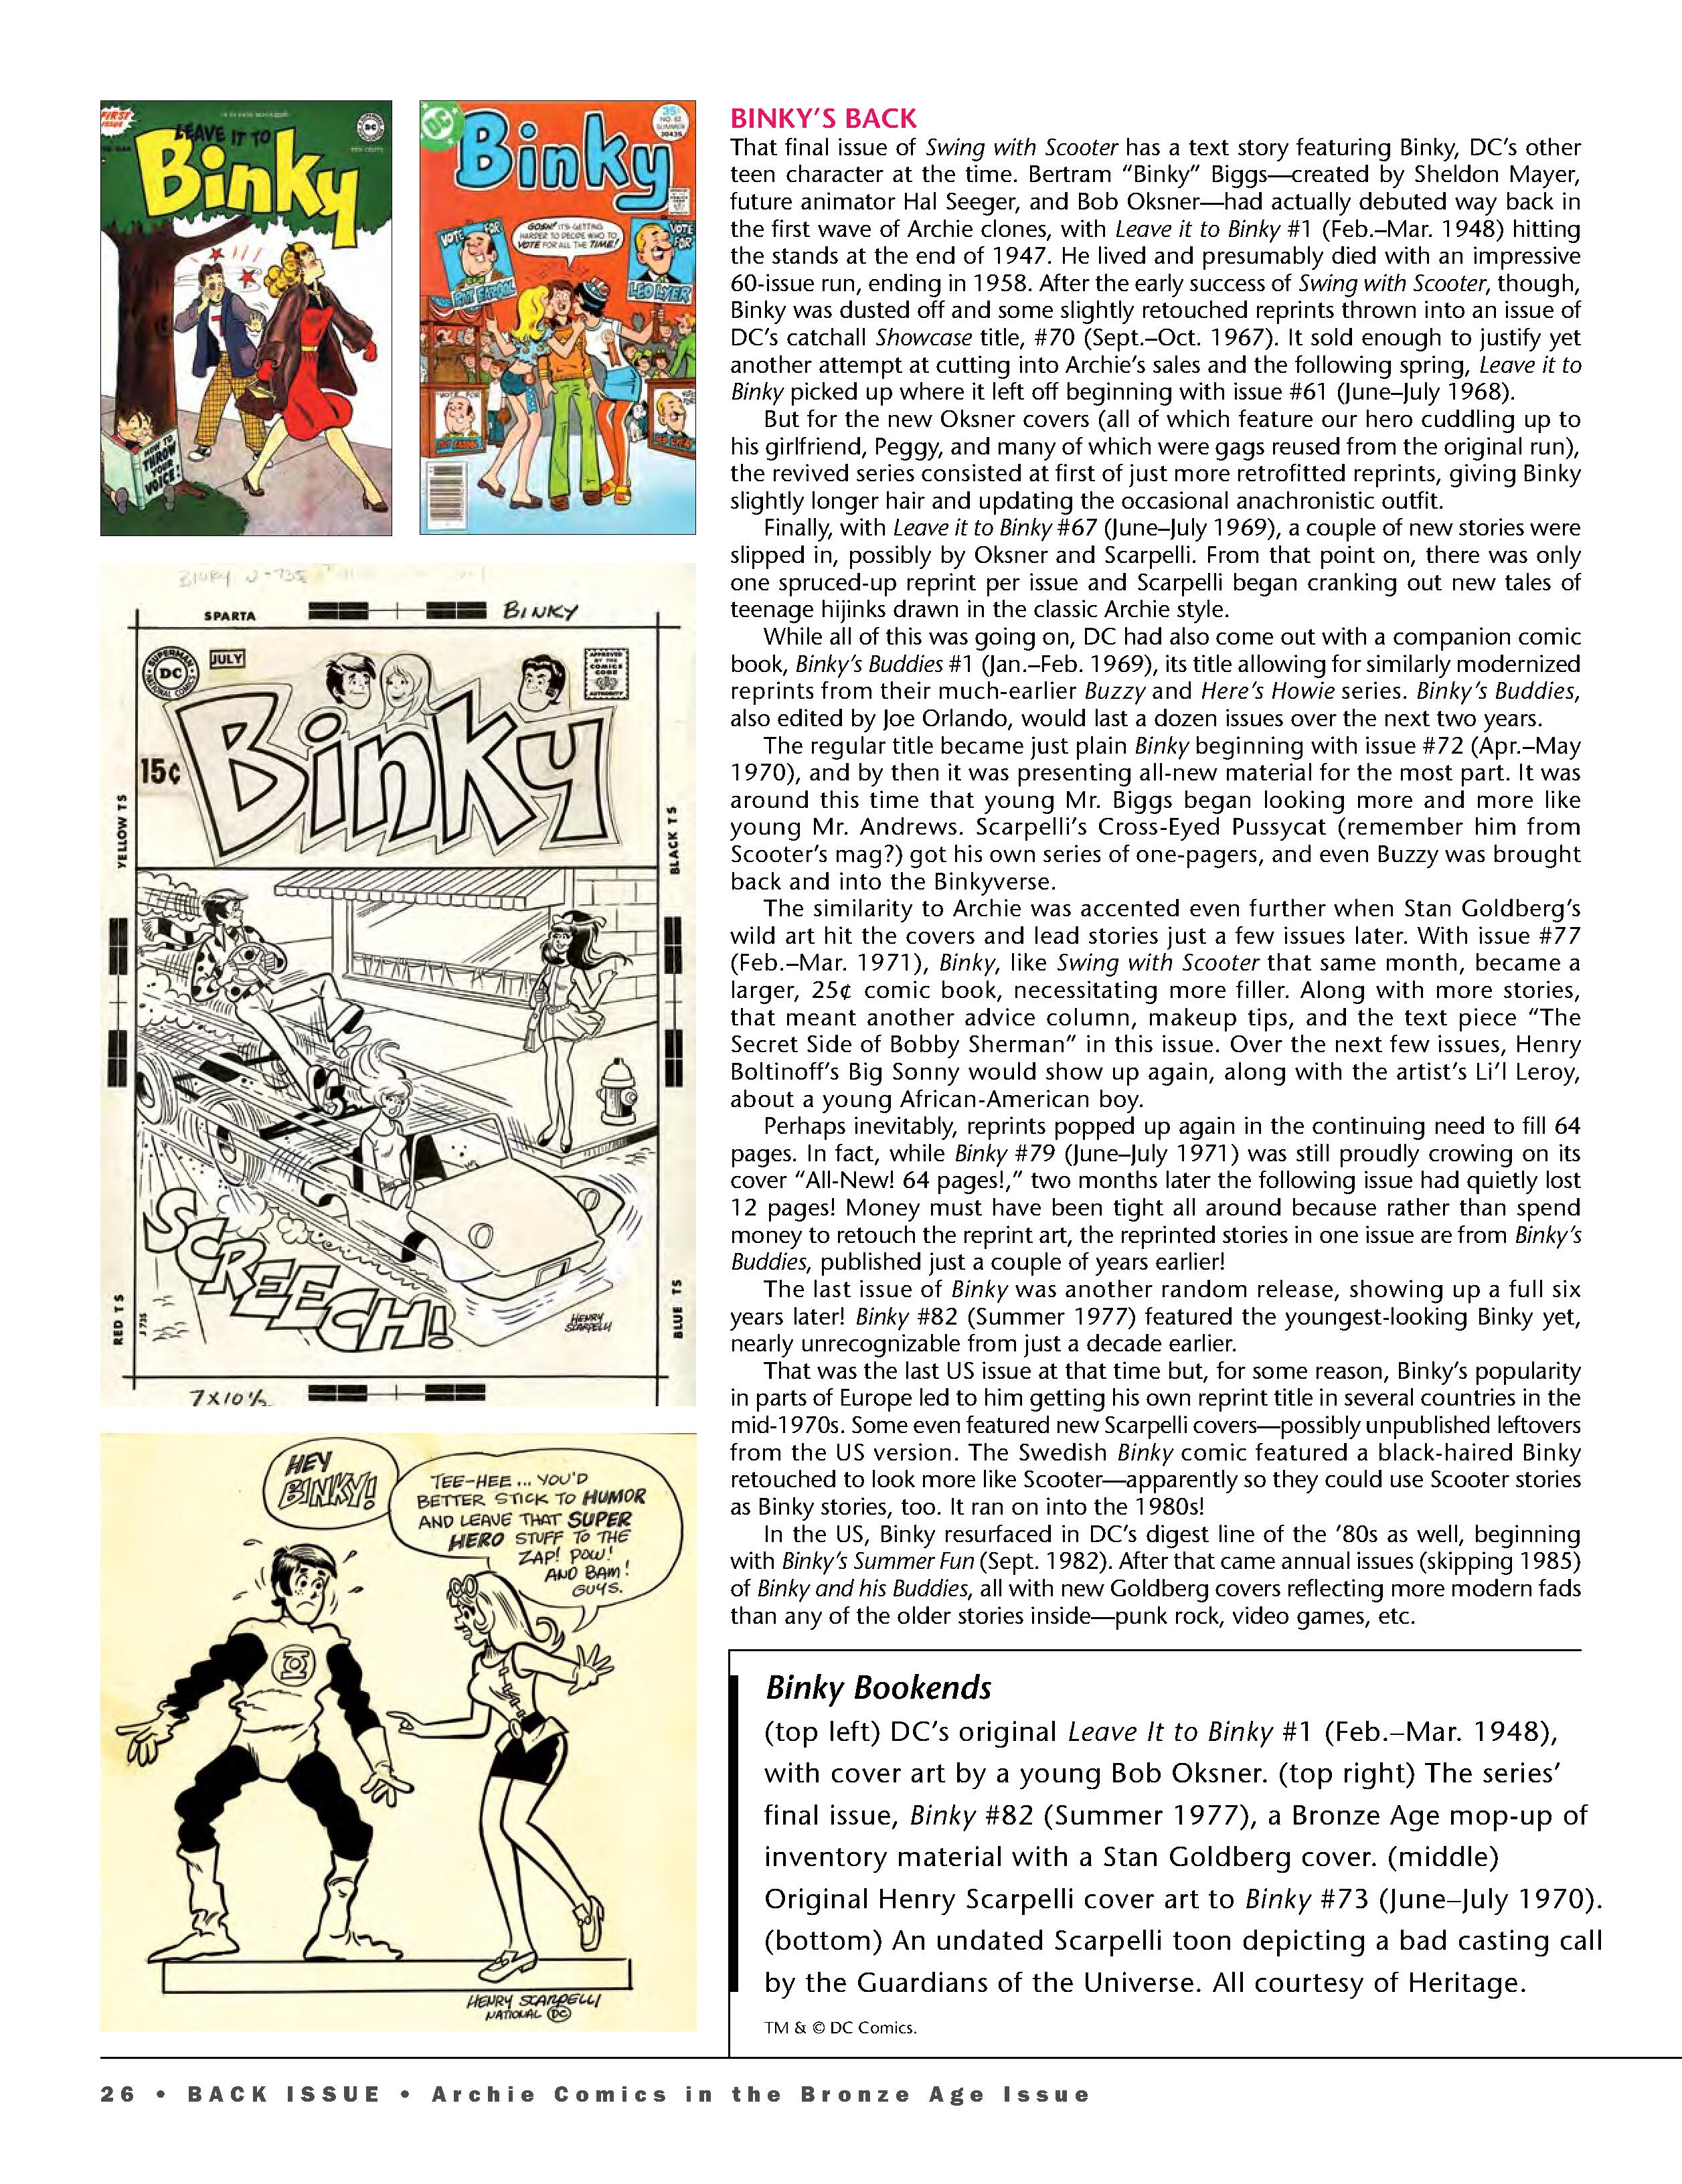 Read online Back Issue comic -  Issue #107 - 28